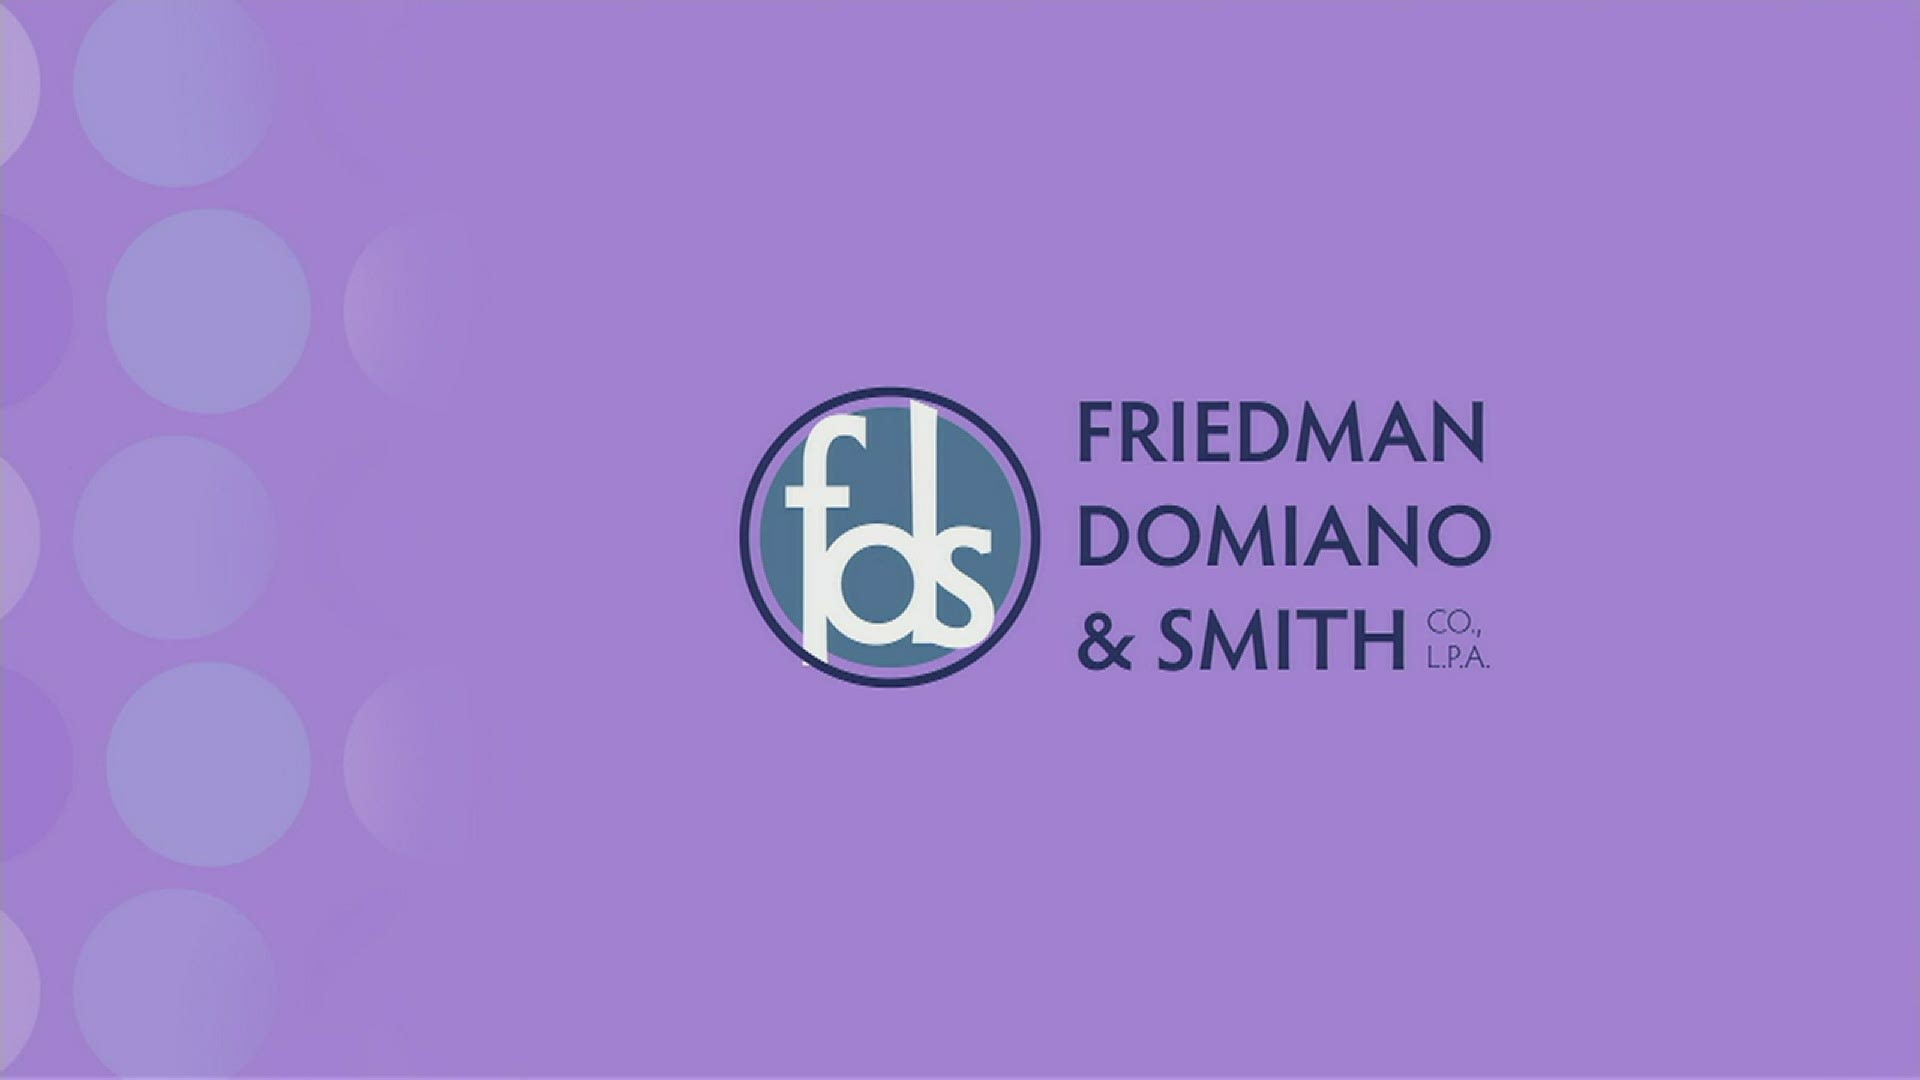 Joe talks with Marco Bocciarelli from Friedman, Domiano & Smith, about possible injuries during winter and who is at fault!